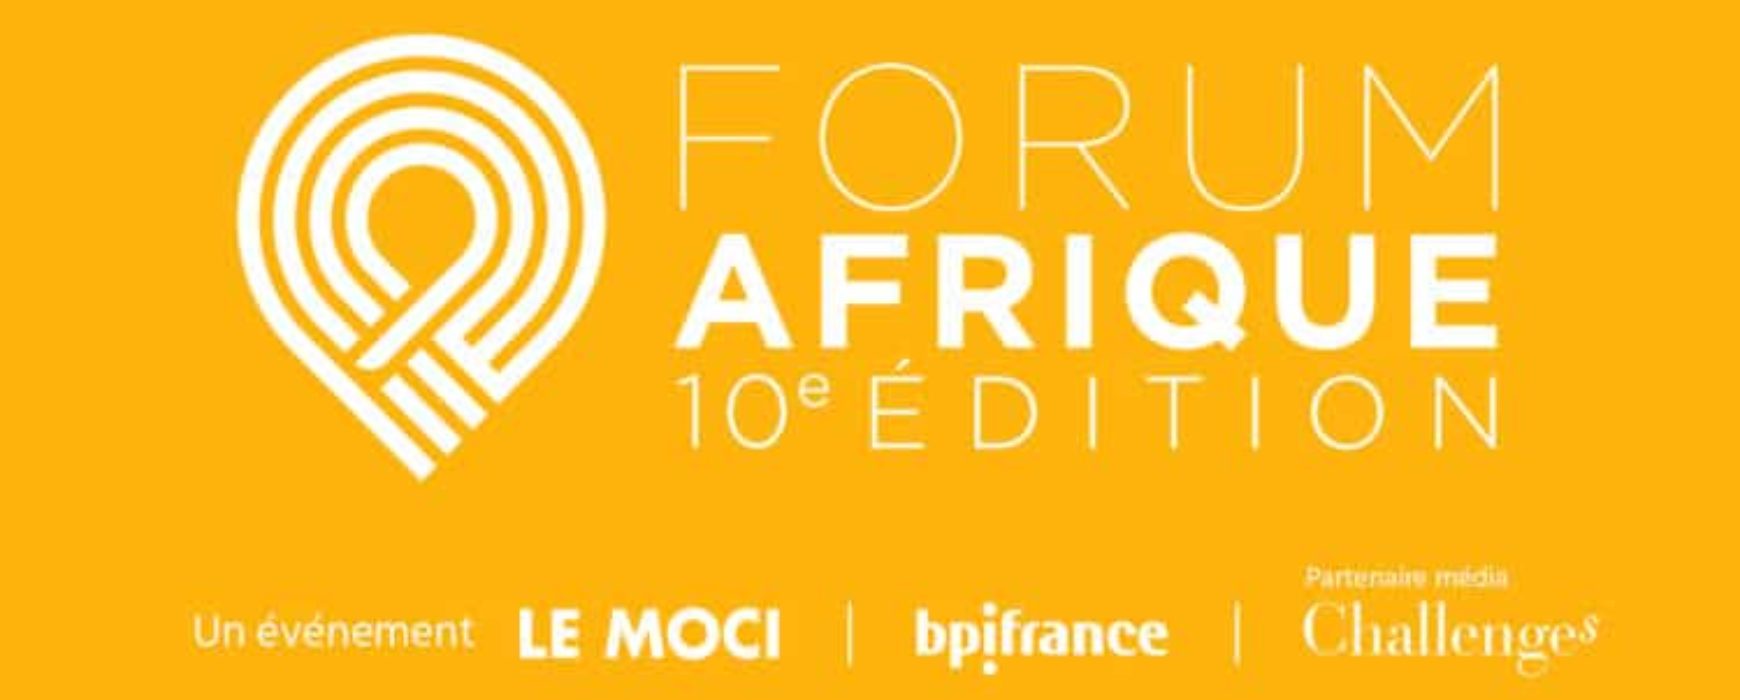 IGN FI at the Africa Forum